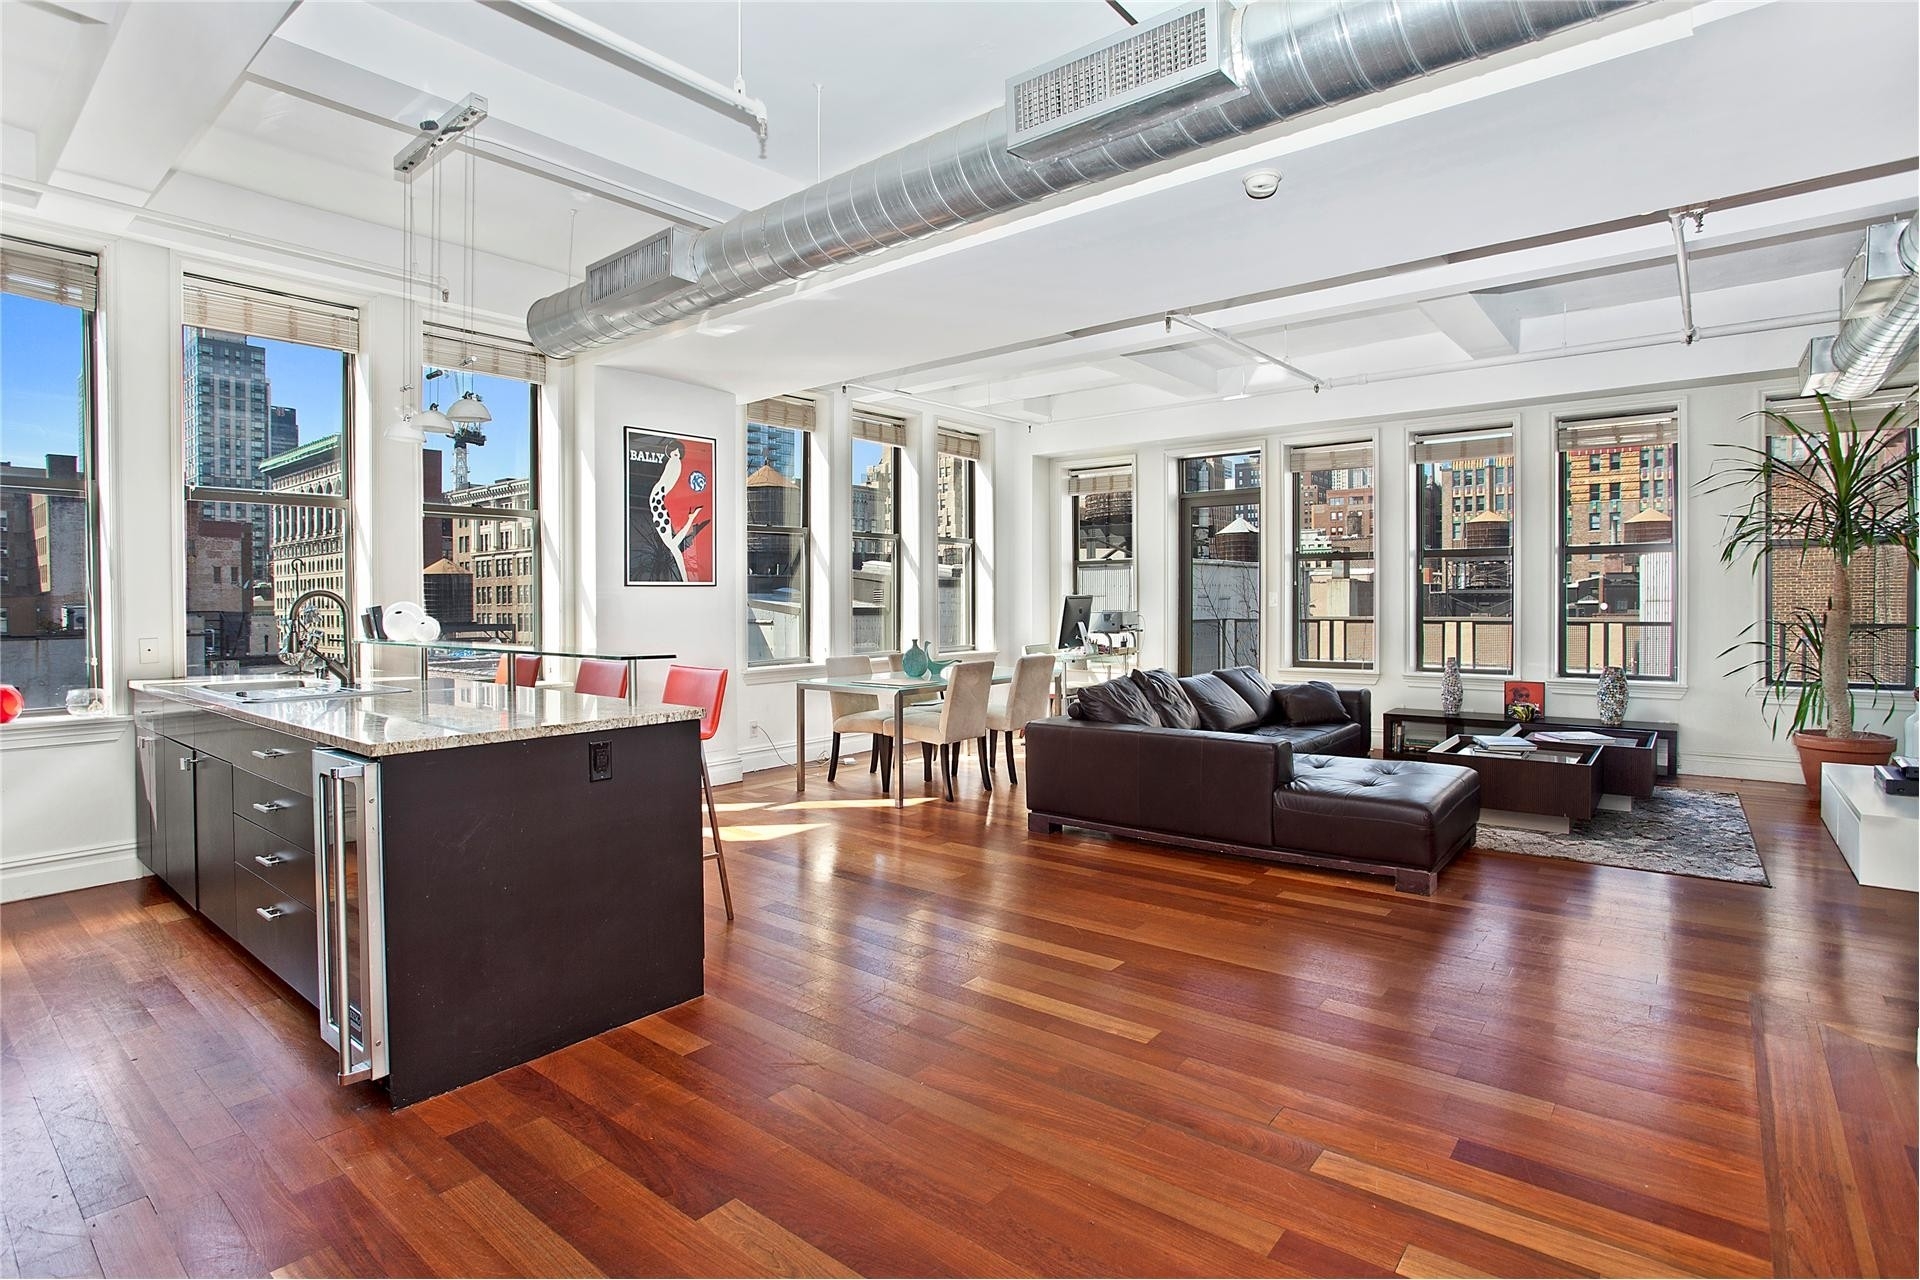 Property at Park South Lofts, 45 East 30th St, PHC New York